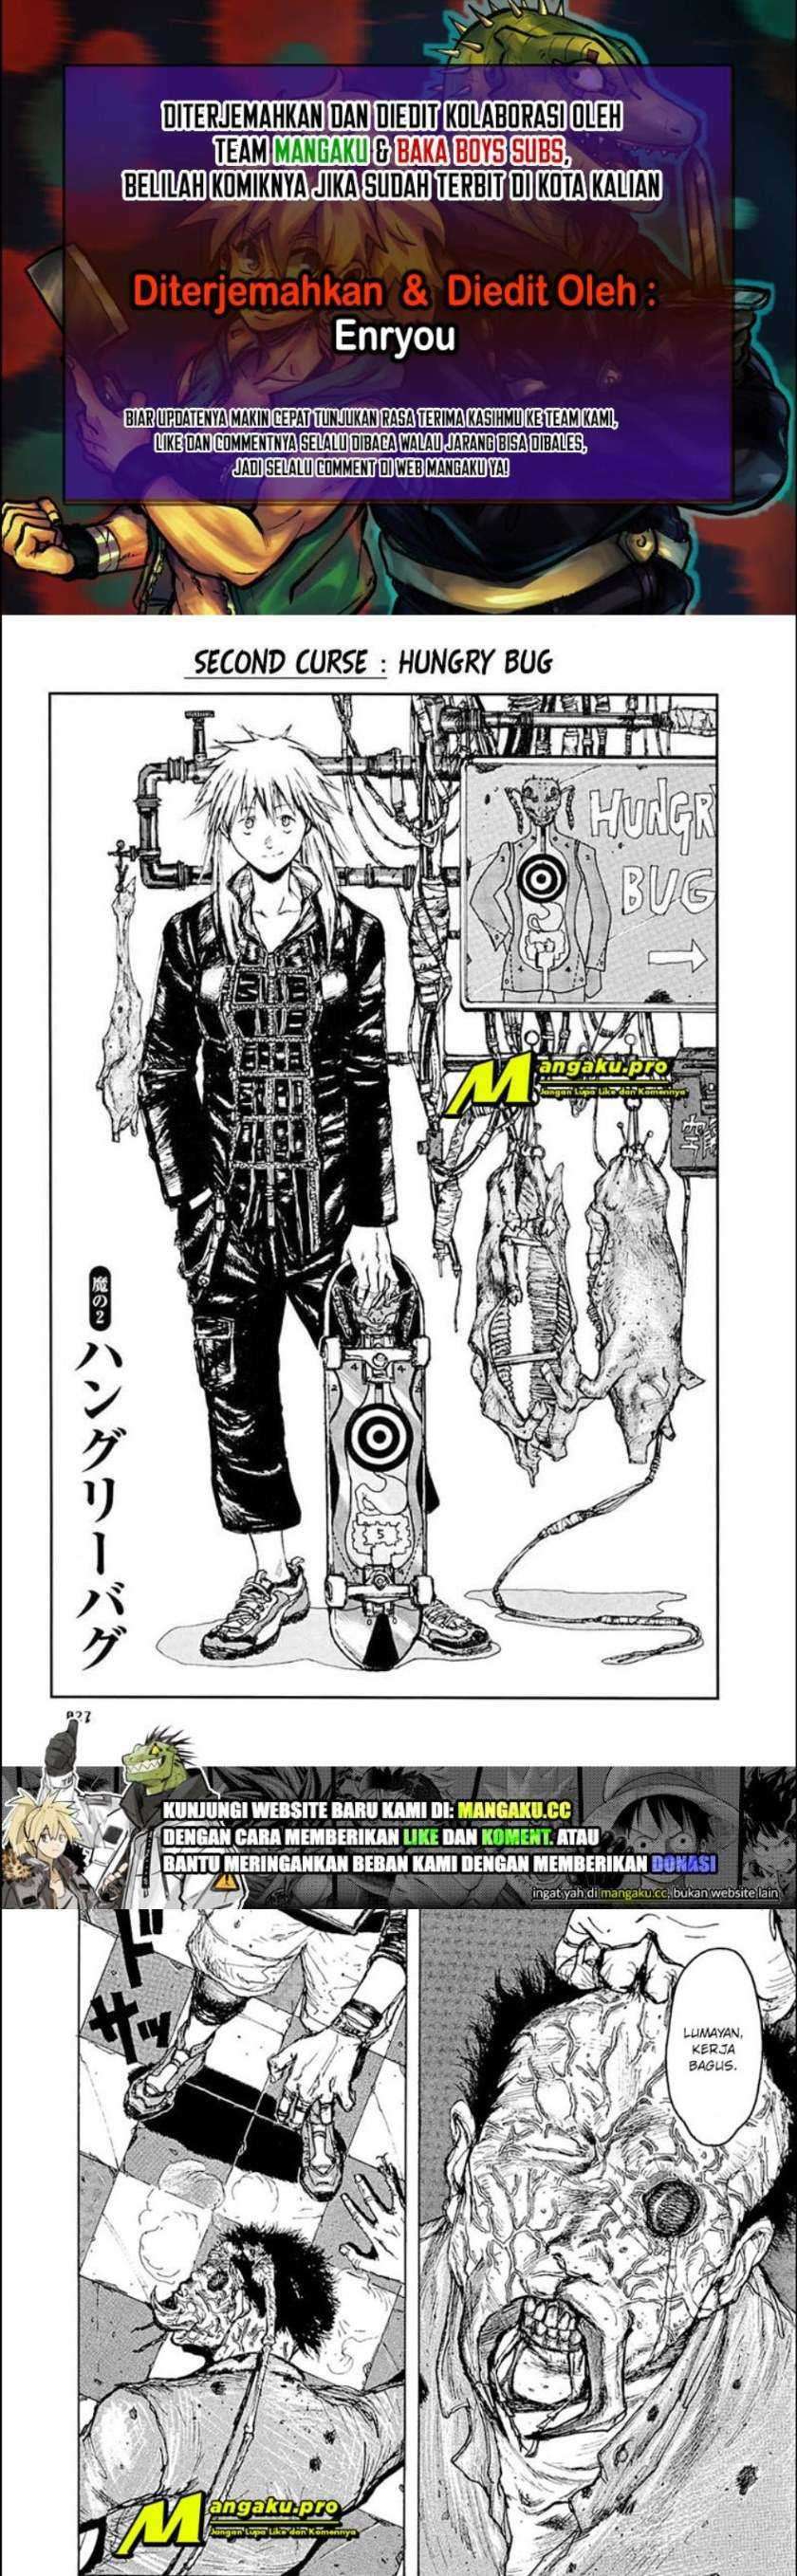 Dorohedoro: Chapter 2 - Page 1